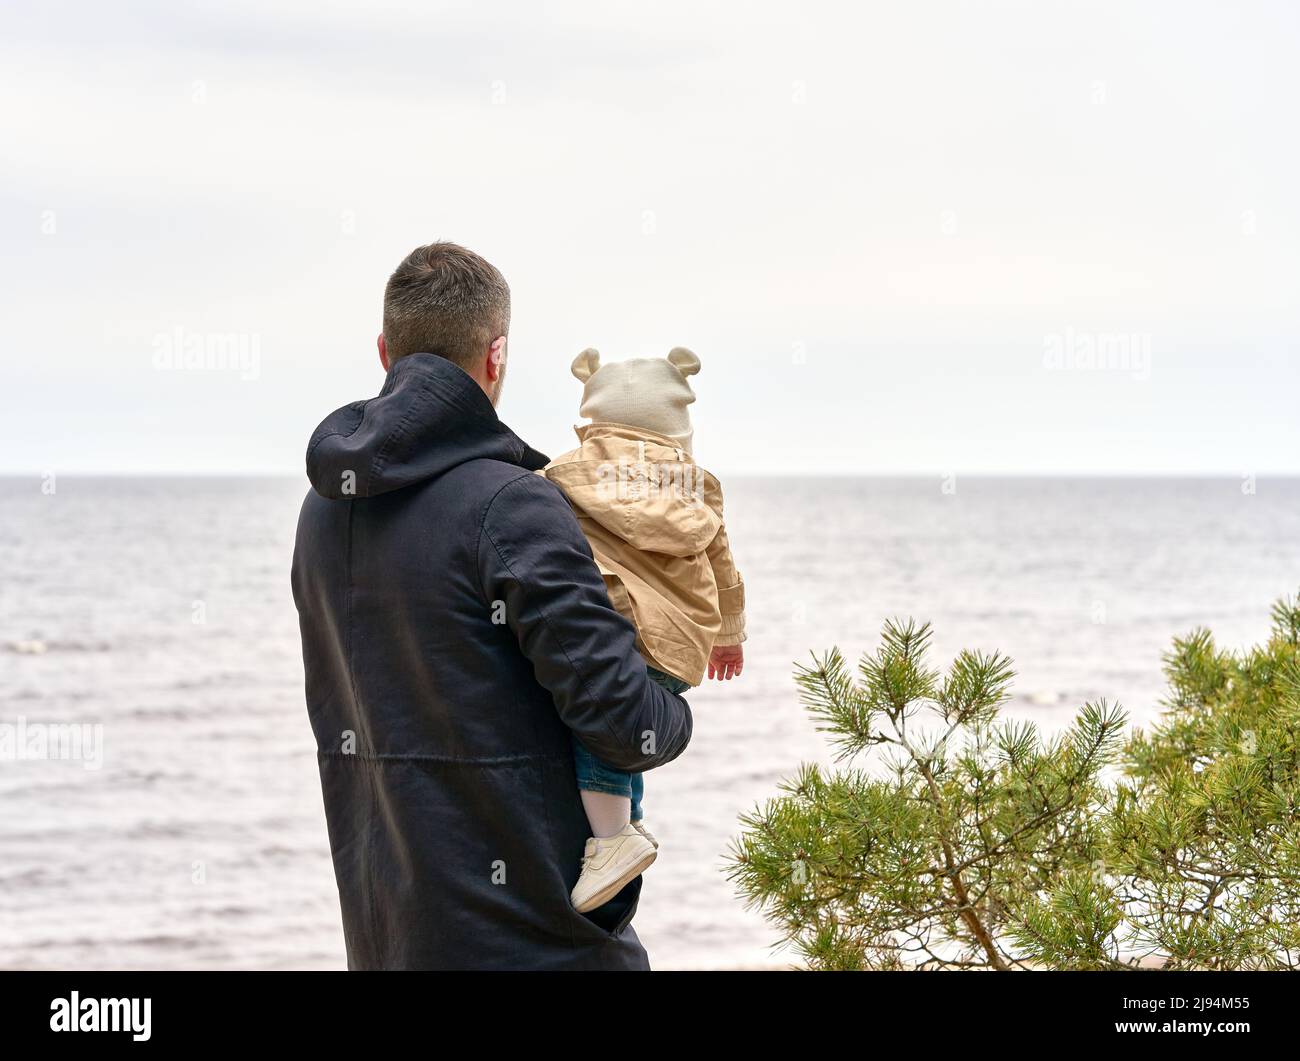 Father holding baby on his hands. They are looking at the horizon standing on the sea shore. Pine tree at the right side. Stock Photo